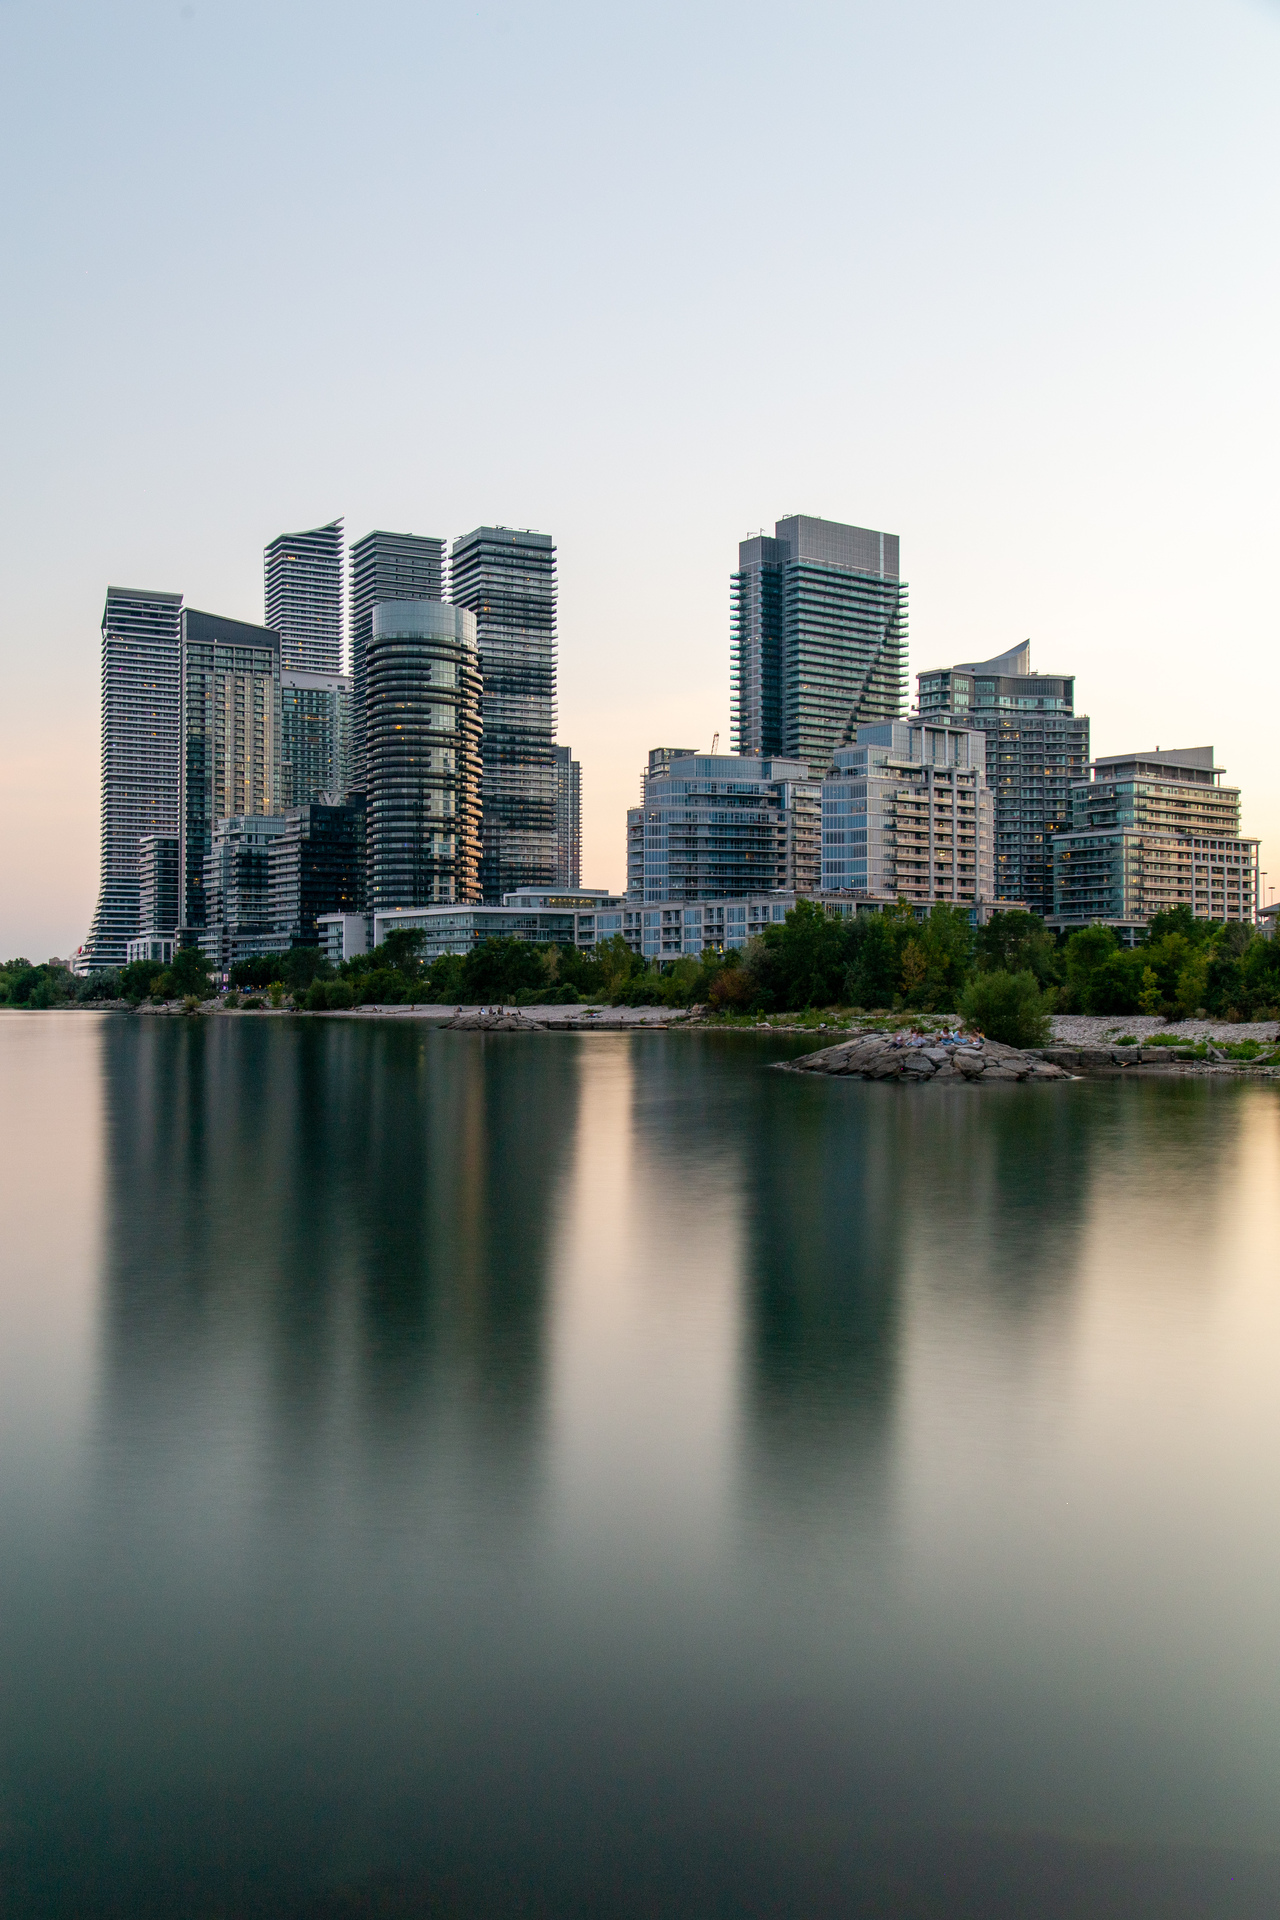 The towers of Humber Bay Shores reflected in the waters of Lake Ontario, Toronto